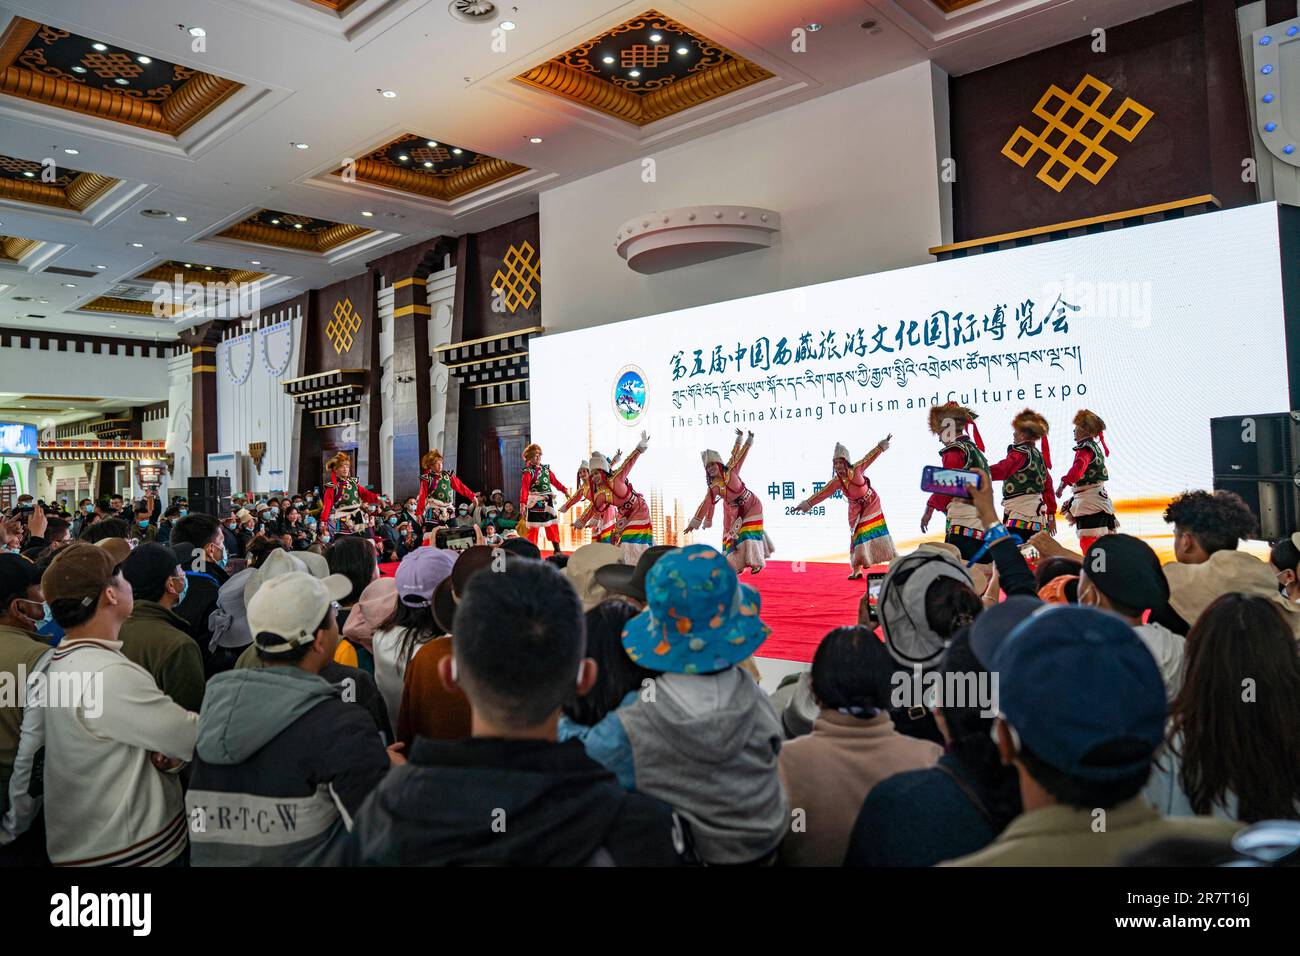 Lhasa, China's Tibet Autonomous Region. 17th June, 2023. Dancers perform during the 5th China Xizang Tourism and Culture Expo in Lhasa, southwest China's Tibet Autonomous Region, June 17, 2023. The 5th China Xizang Tourism and Culture Expo opened here on Friday. The three-day expo is one of the most important events on Tibet's cultural calendar. Nearly 1,000 businesses from home and abroad have attended the event, bringing about 10,000 different products. Credit: Sun Fei/Xinhua/Alamy Live News Stock Photo